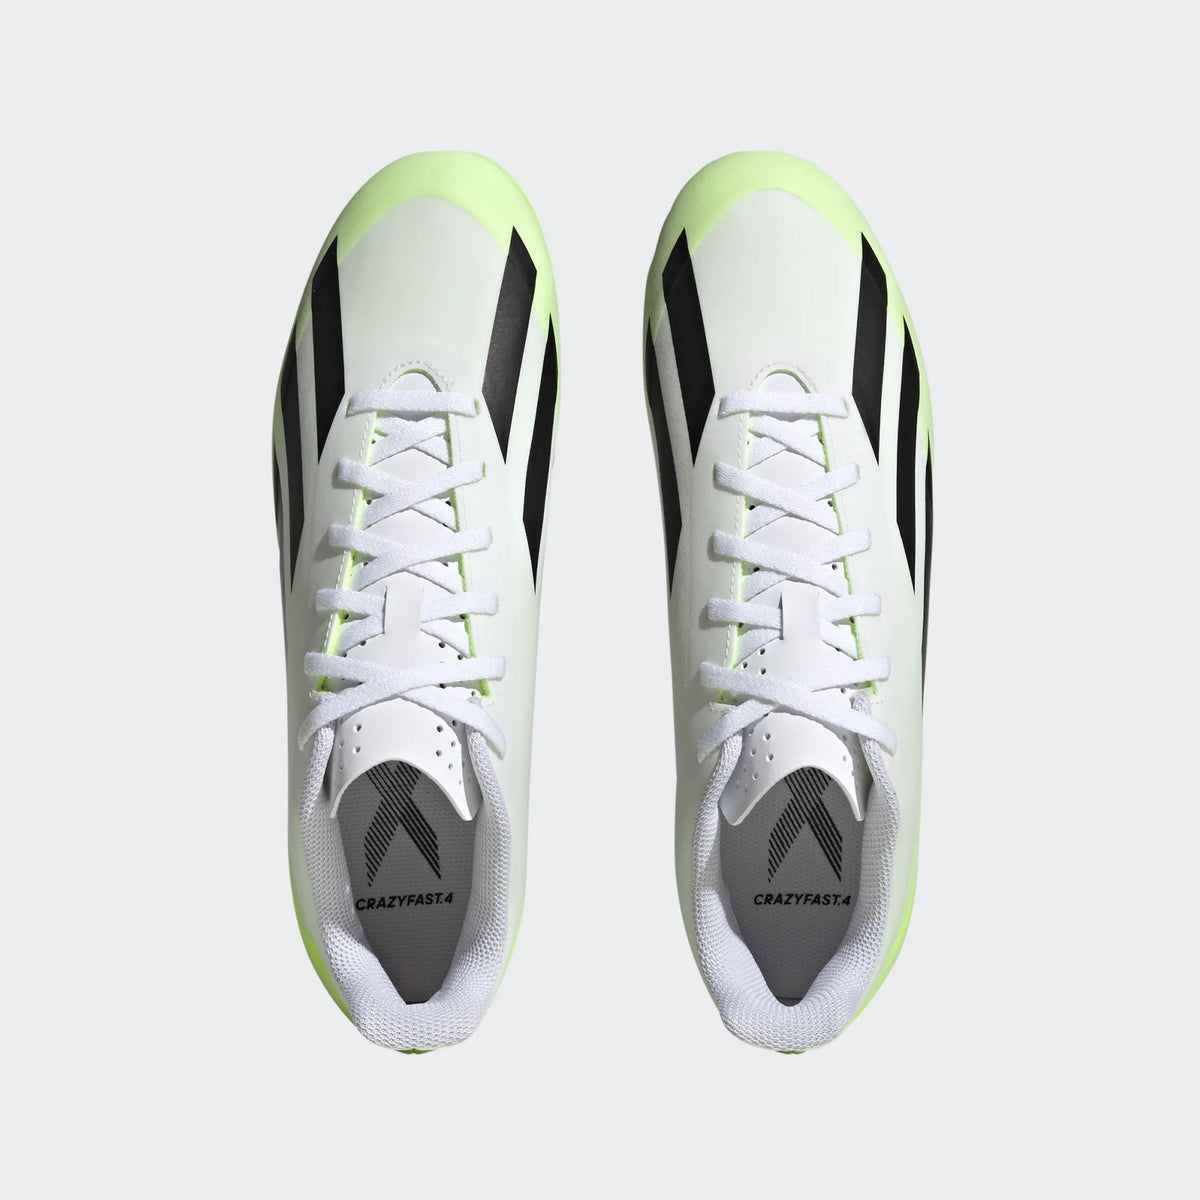 Adidas X Crazy Fast .4 FXG Football Boots: White/Green